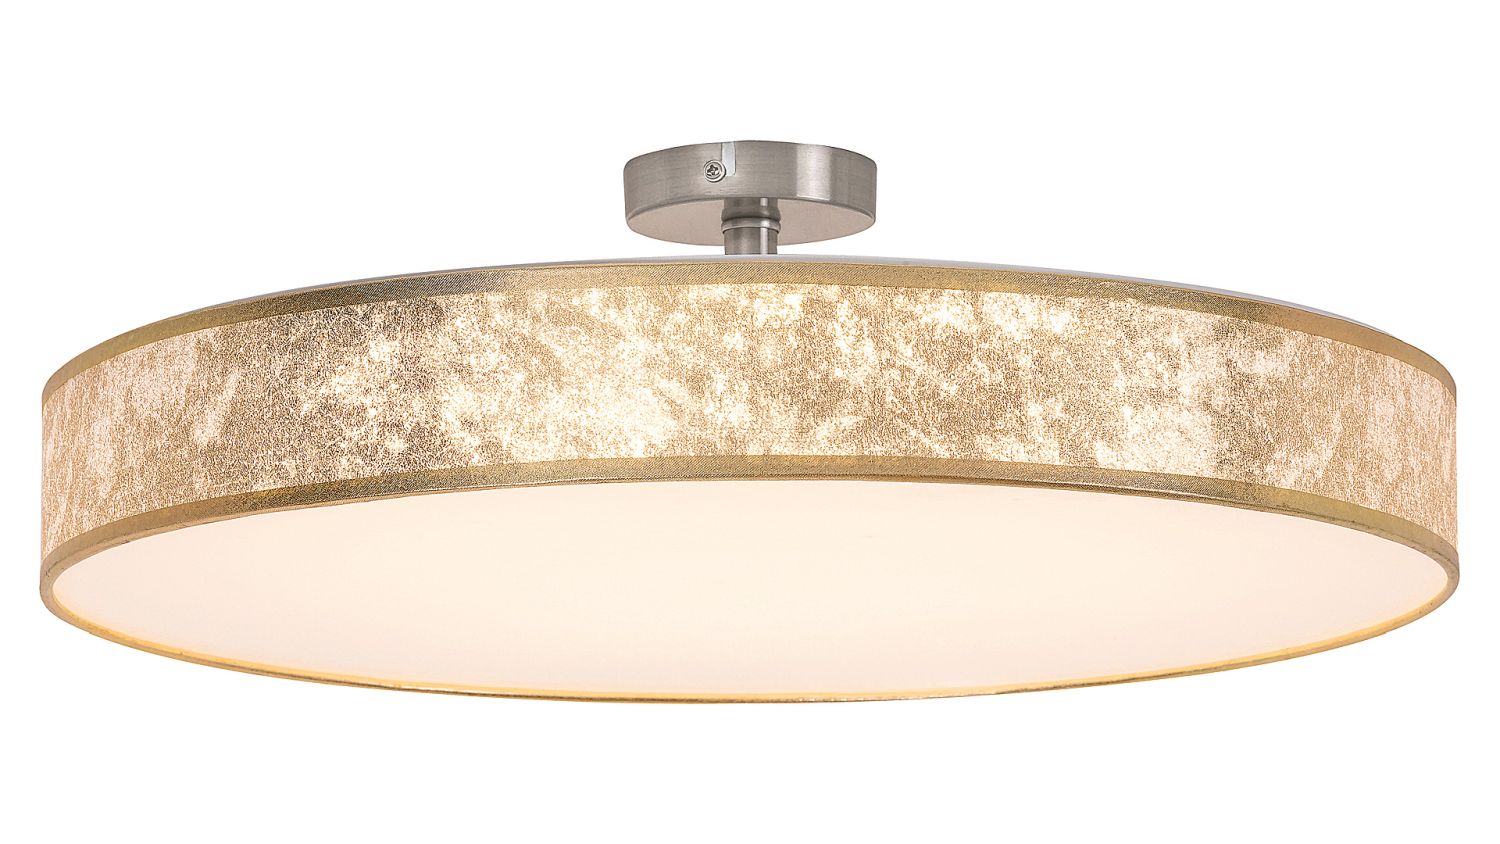 Dimmbare LED Deckenlampe in Gold blendarm 2300lm